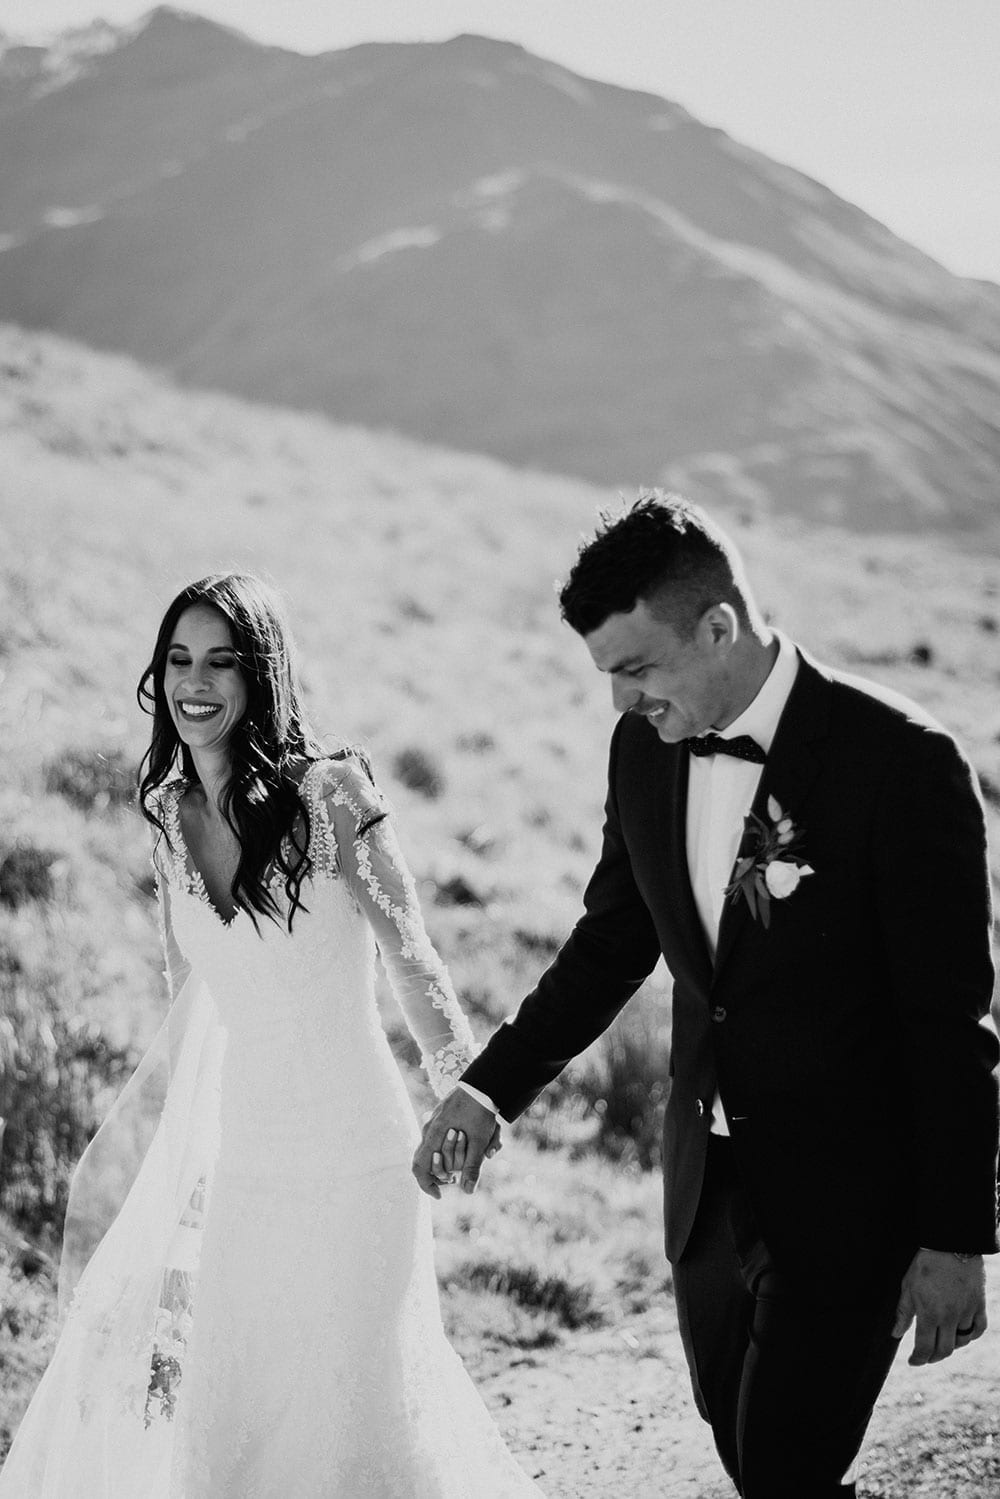 Vinka Design Features Real Weddings - Bride in custom made gown walking along pathway with remarkables mountains backdrop in black and white